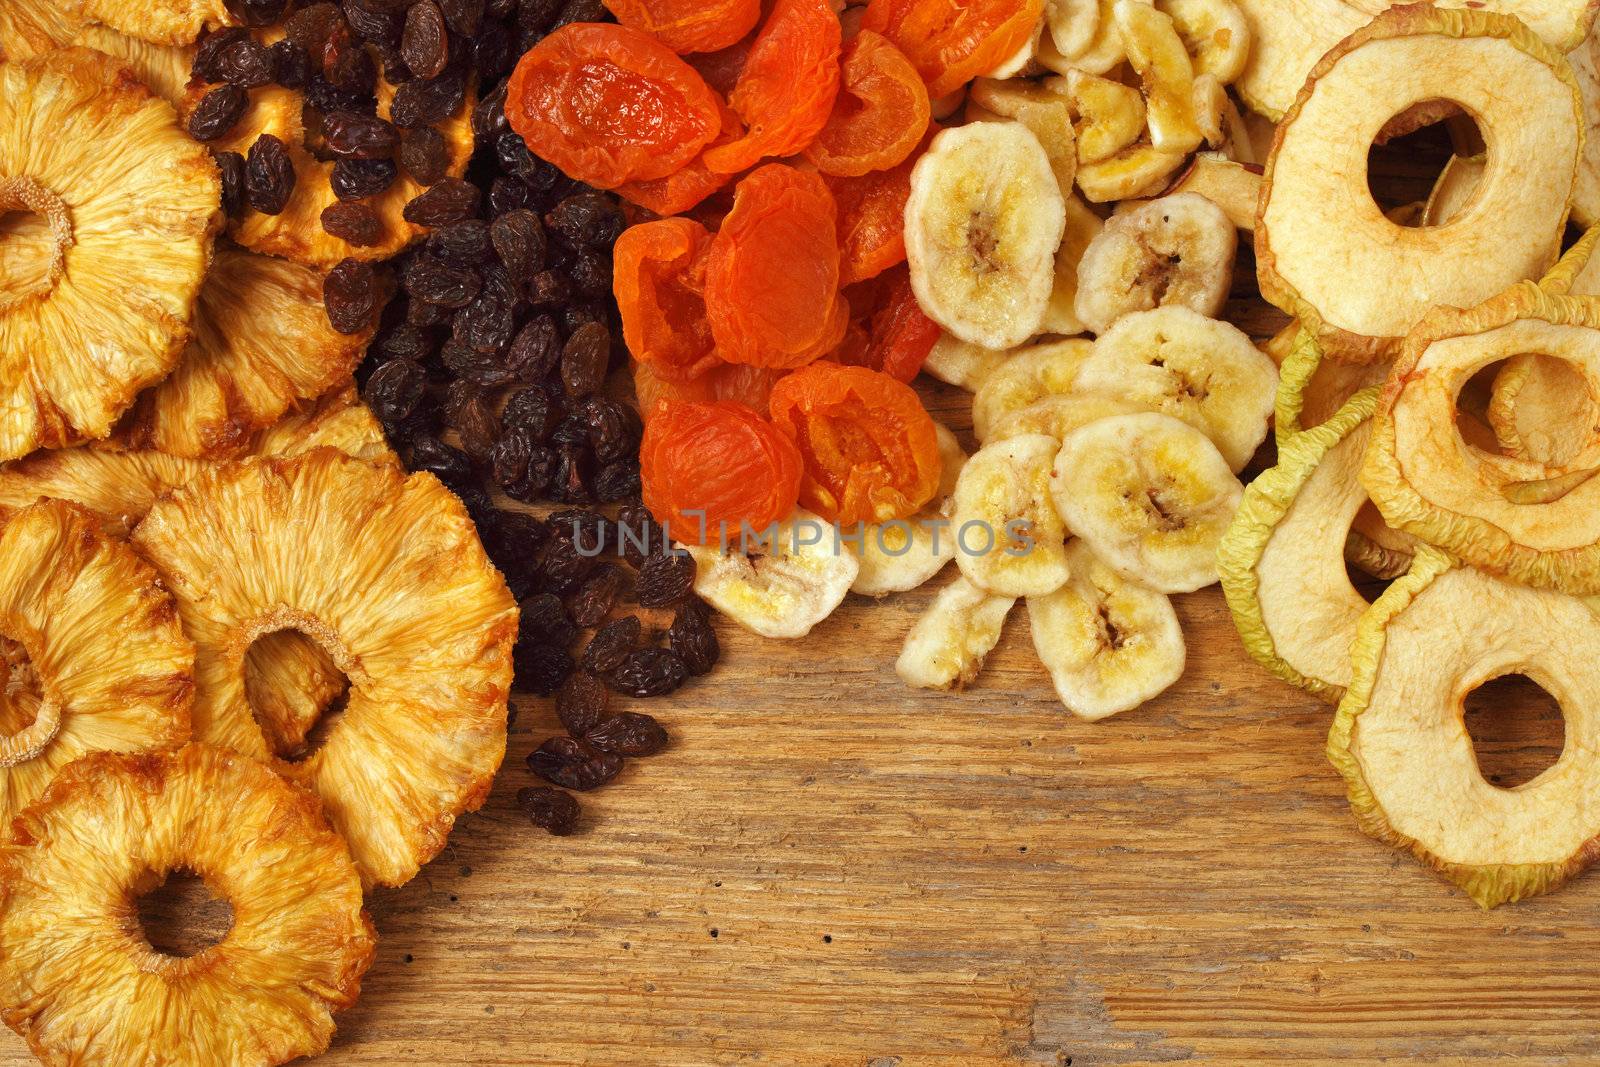 Dried fruit by sumners